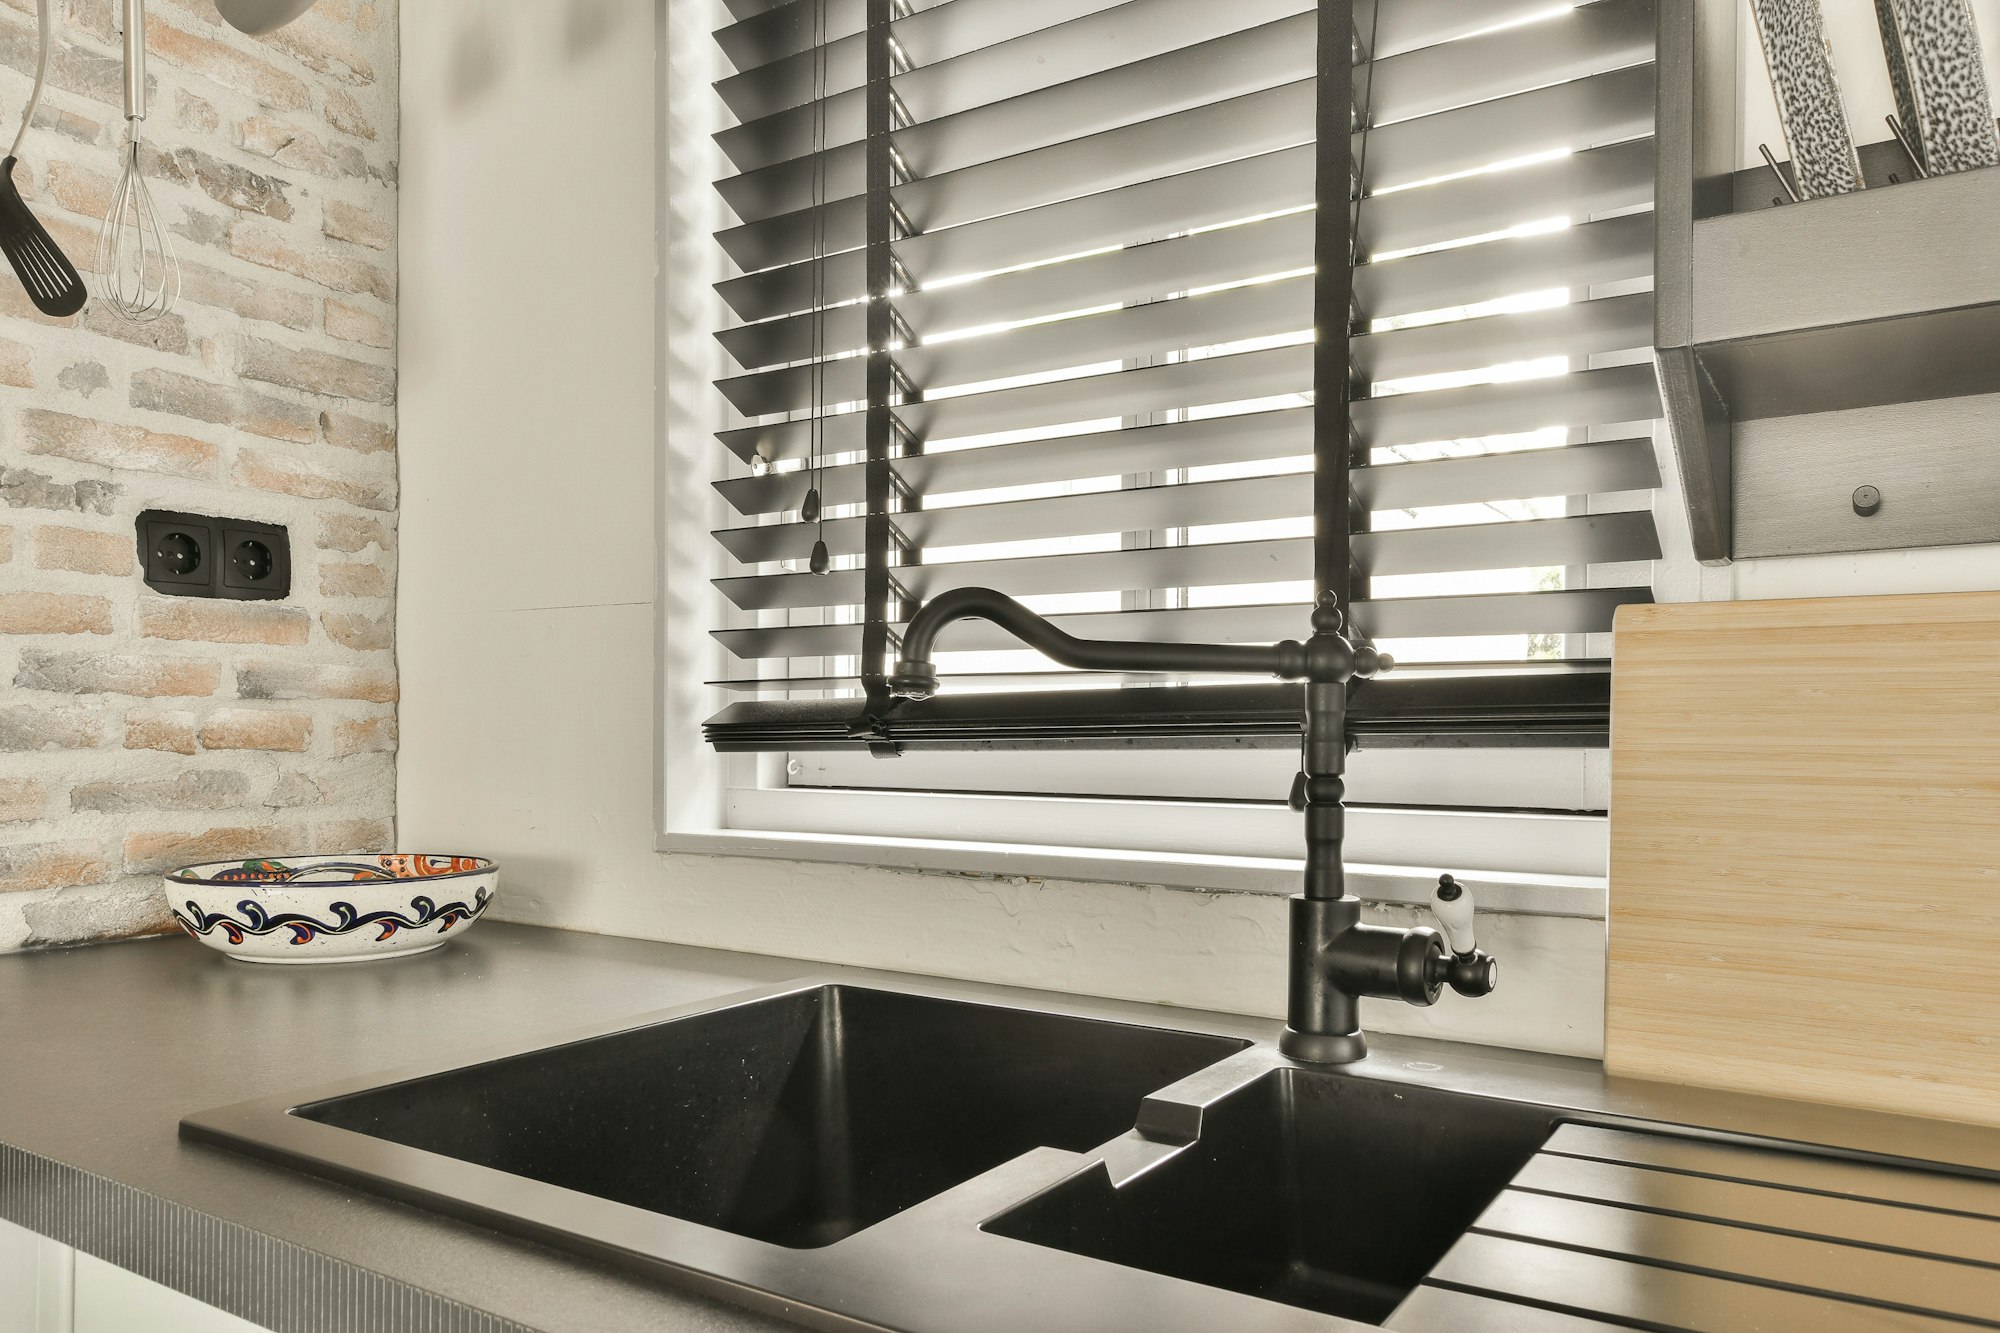 a kitchen sink under a window with white blinds